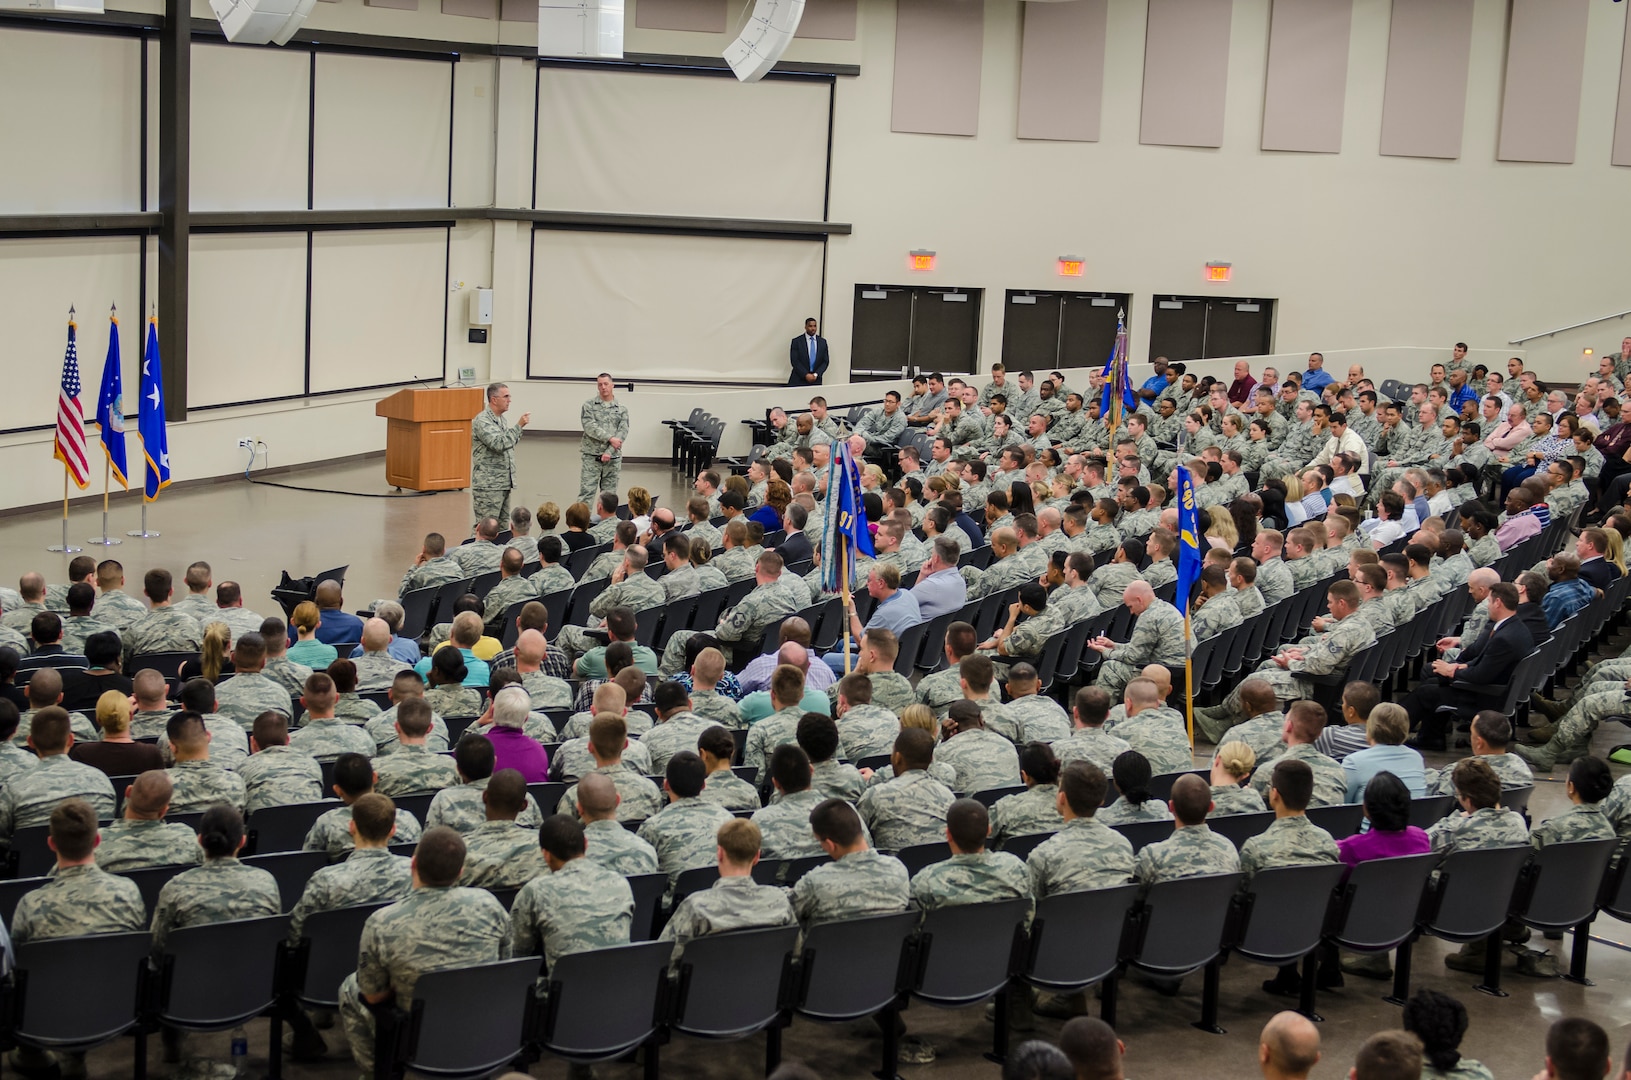 Gen. John E. Hyten, Air Force Space Command commander and Chief Master Sgt. Douglas L. McIntyre, Air Force Space Command command chief speak to the men and women of 24th Air Force during an All-Call at the Pfingston Reception Center located on Joint Base San Antonio – Lackland, Texas, June 3. Hyten and McIntyre concluded their multi-day by sharing their insights on the importance of the Air Force’s cyber mission as well as the importance of being a good Wingman to fellow Airmen. (U.S. Air Force photo by Master Sgt. Luke P. Thelen/Released)